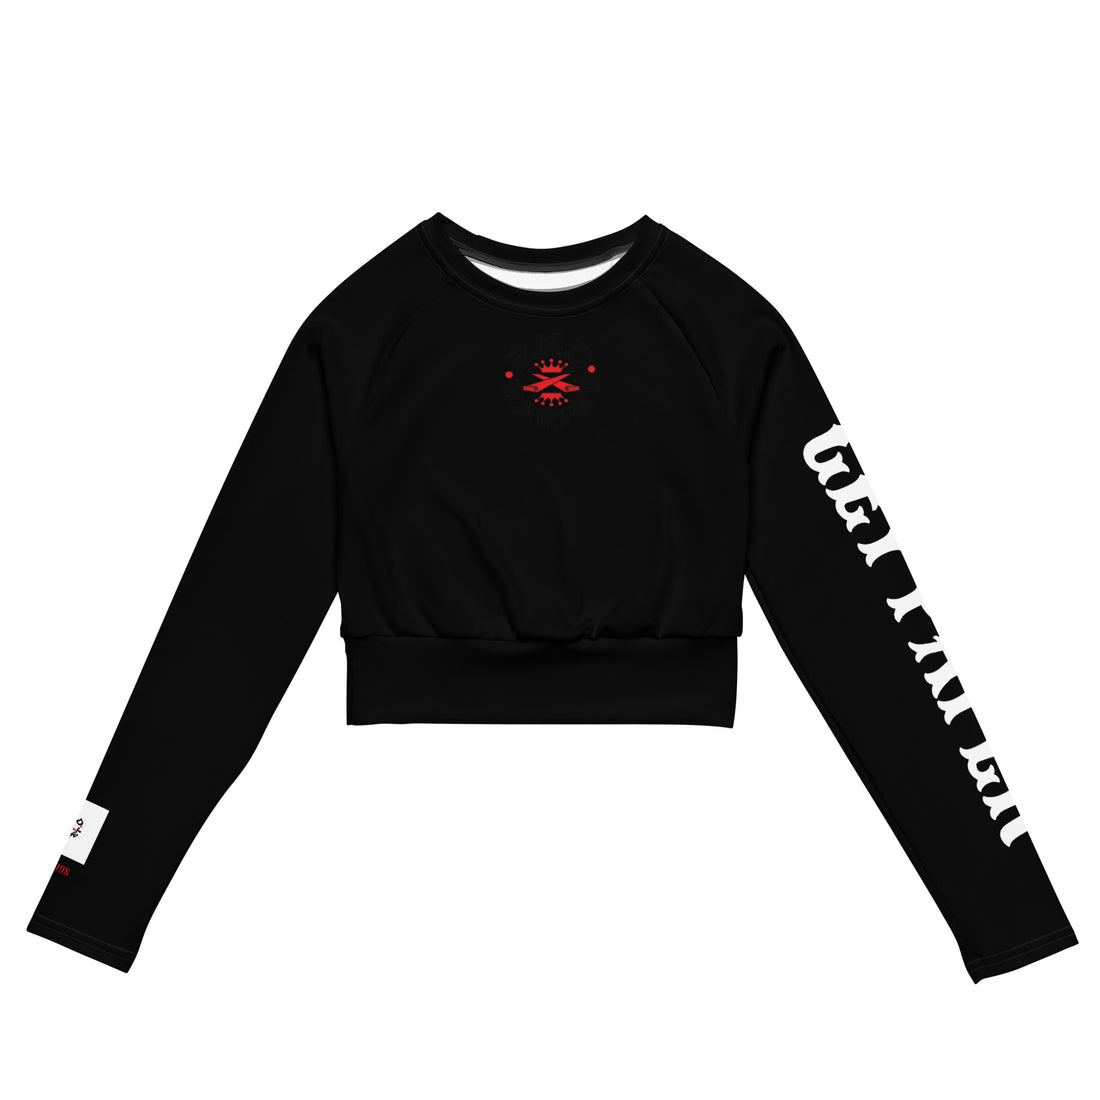 Long sleeve crop- Black Out